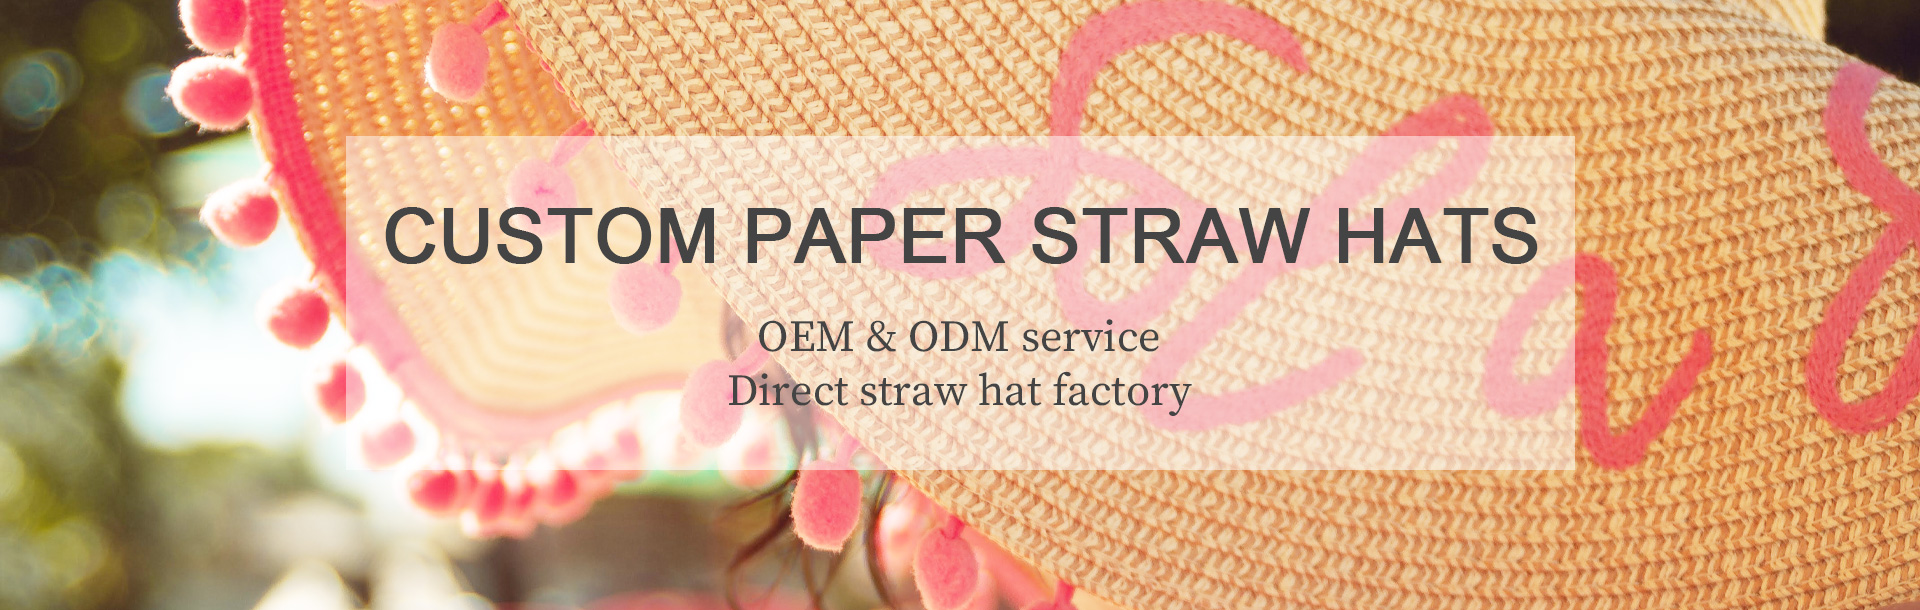 Cowboy straw hats Manufactures